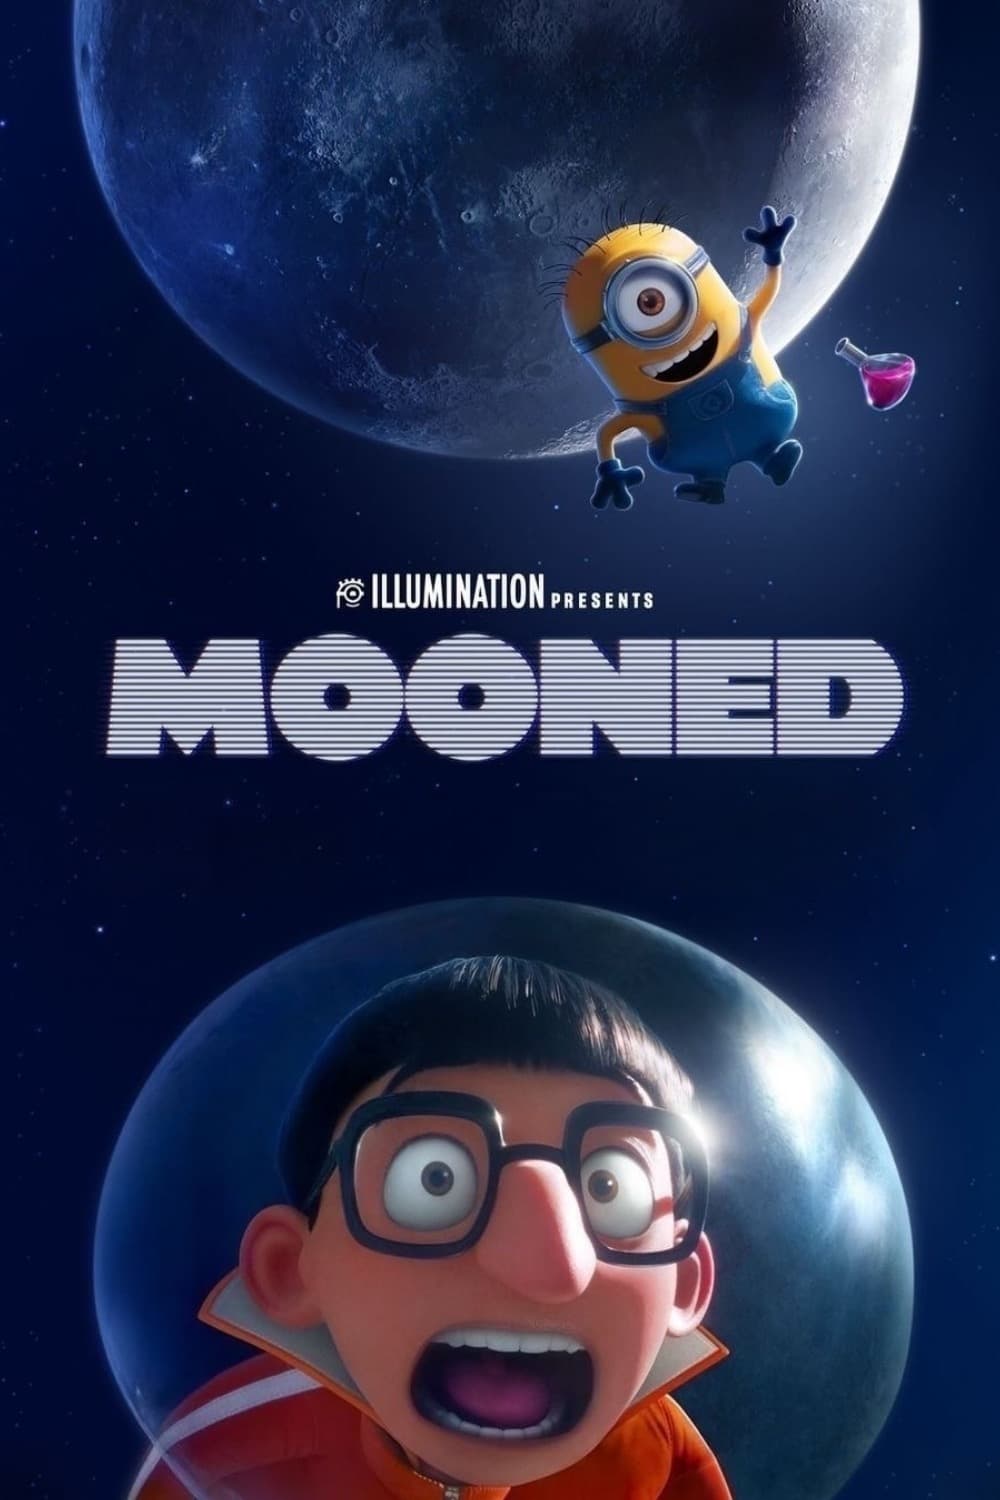 Poster for the movie "Mooned"